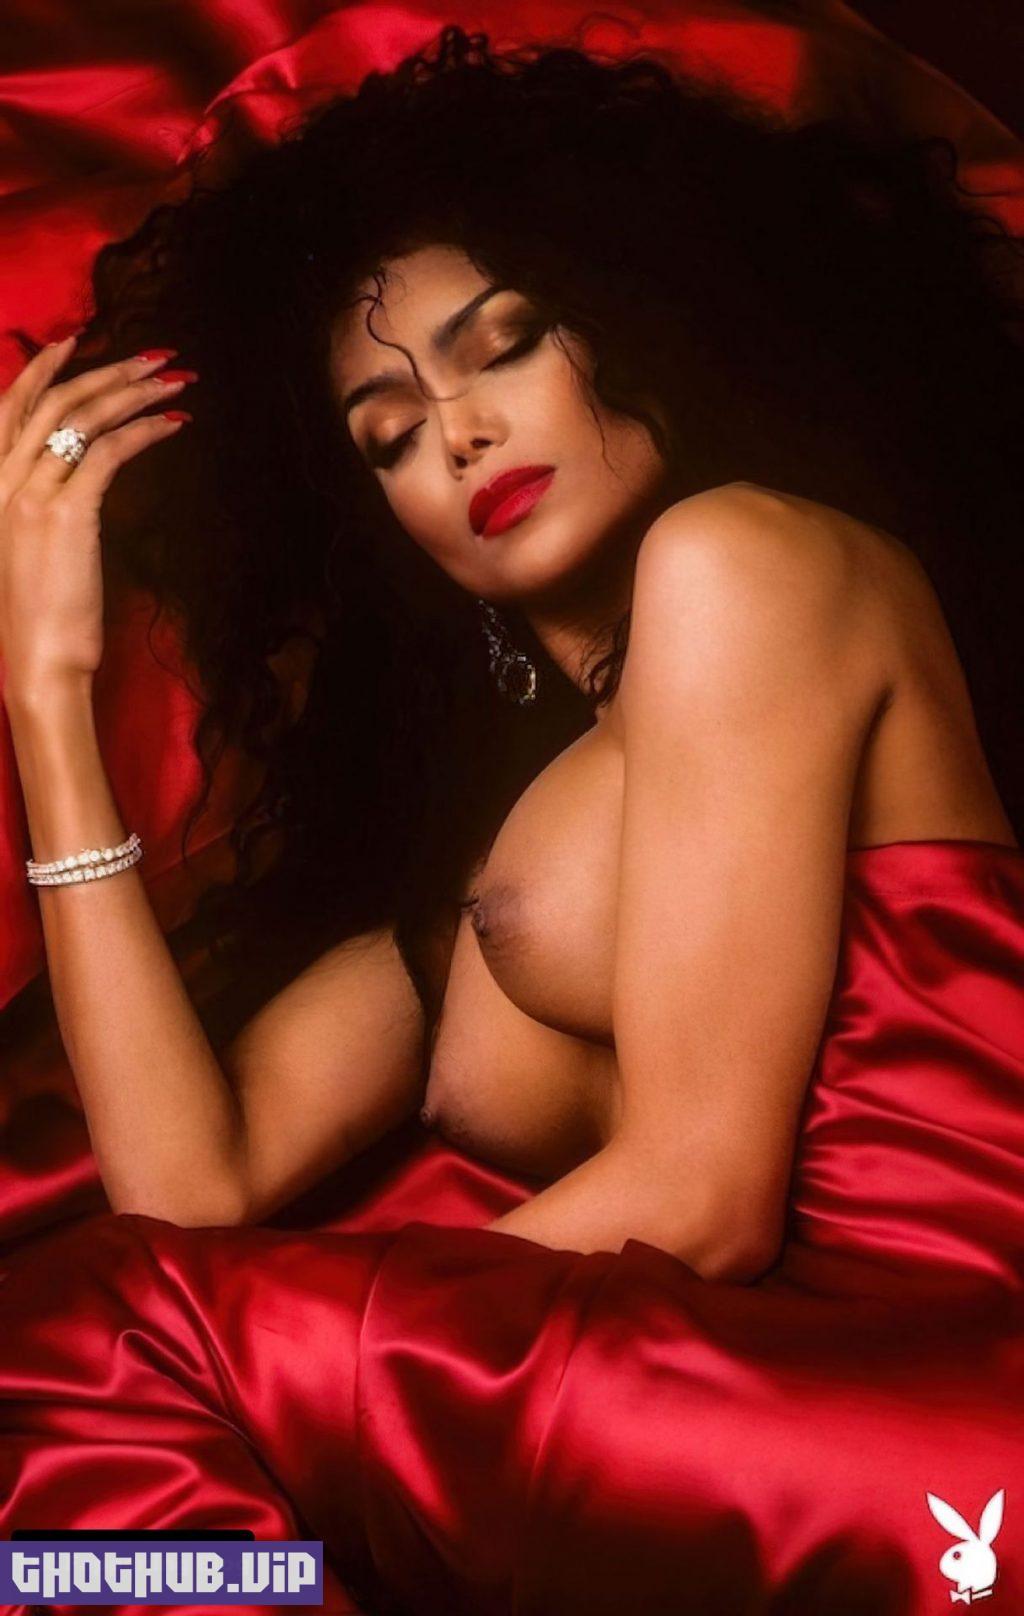 La Toya Jackson Nude Photo Collection The Fappening Blog 8